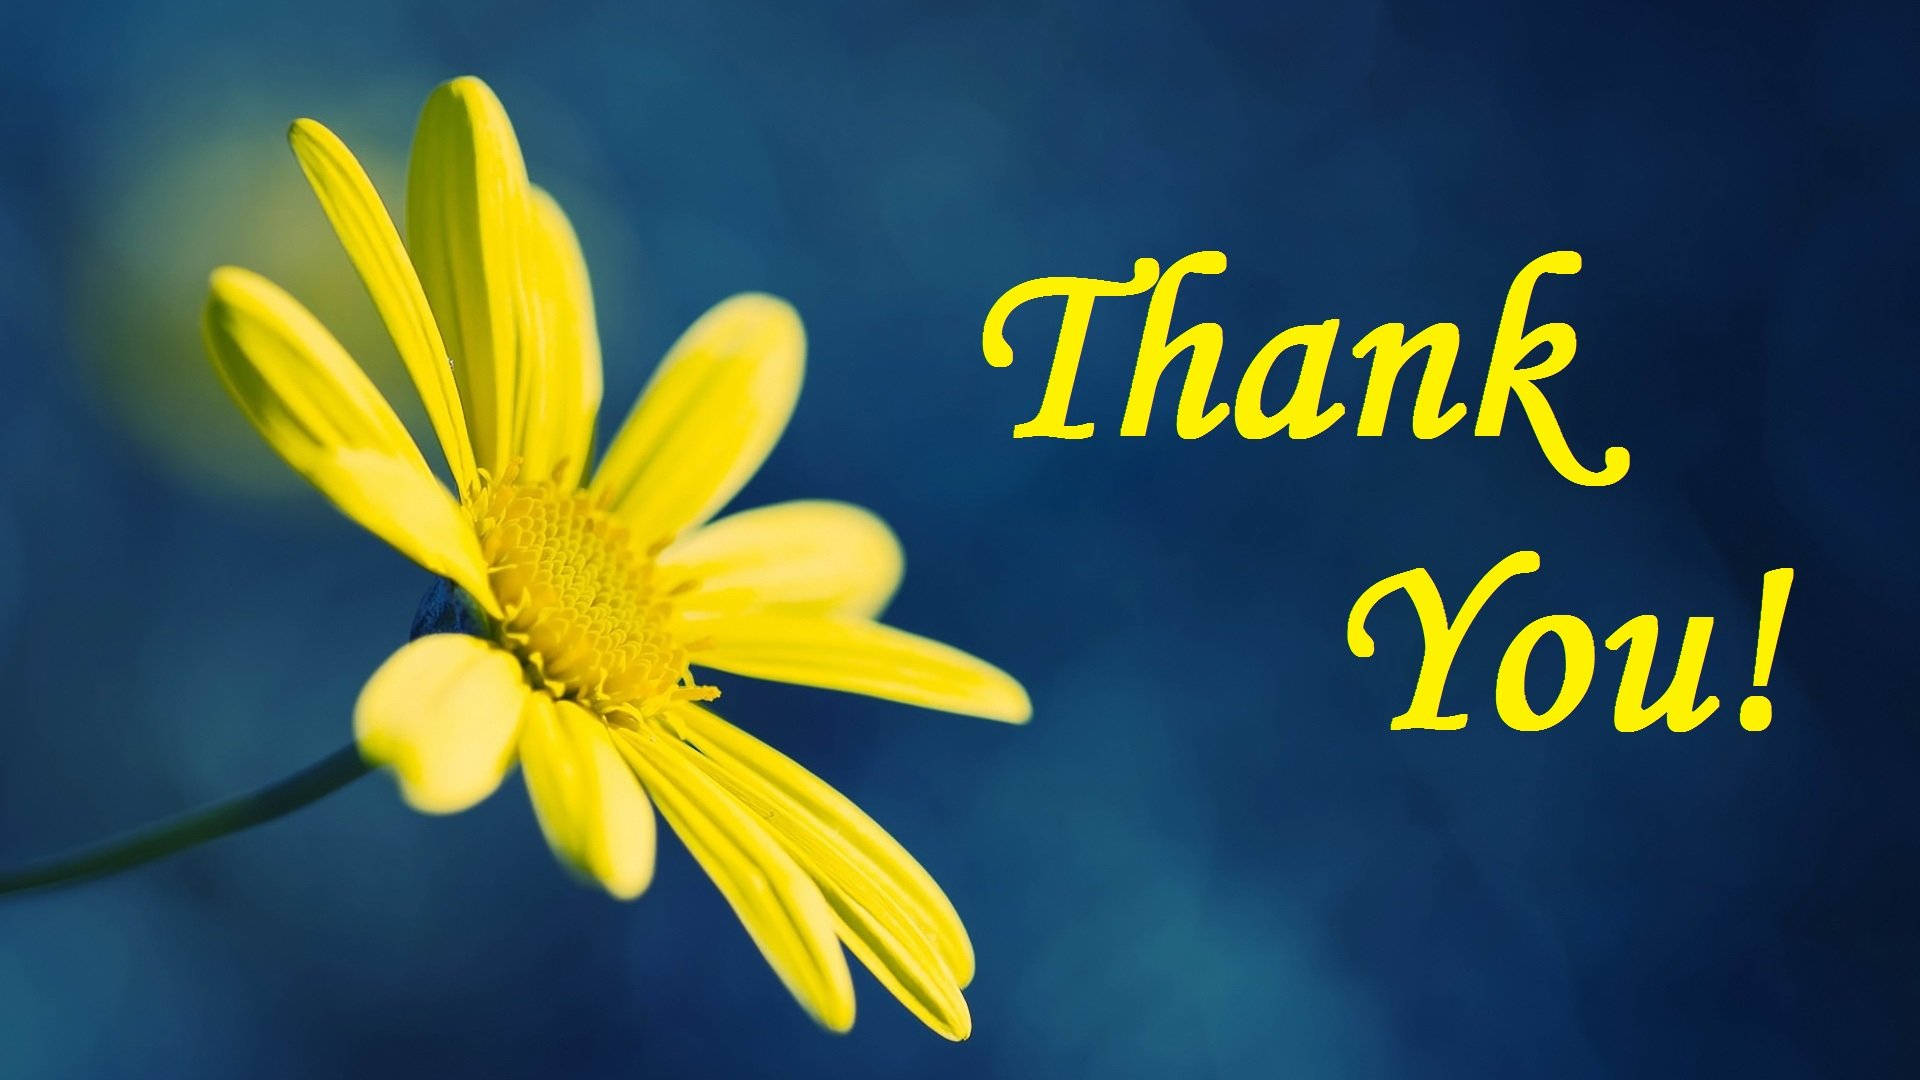 Thank You With Yellow Flower Wallpaper